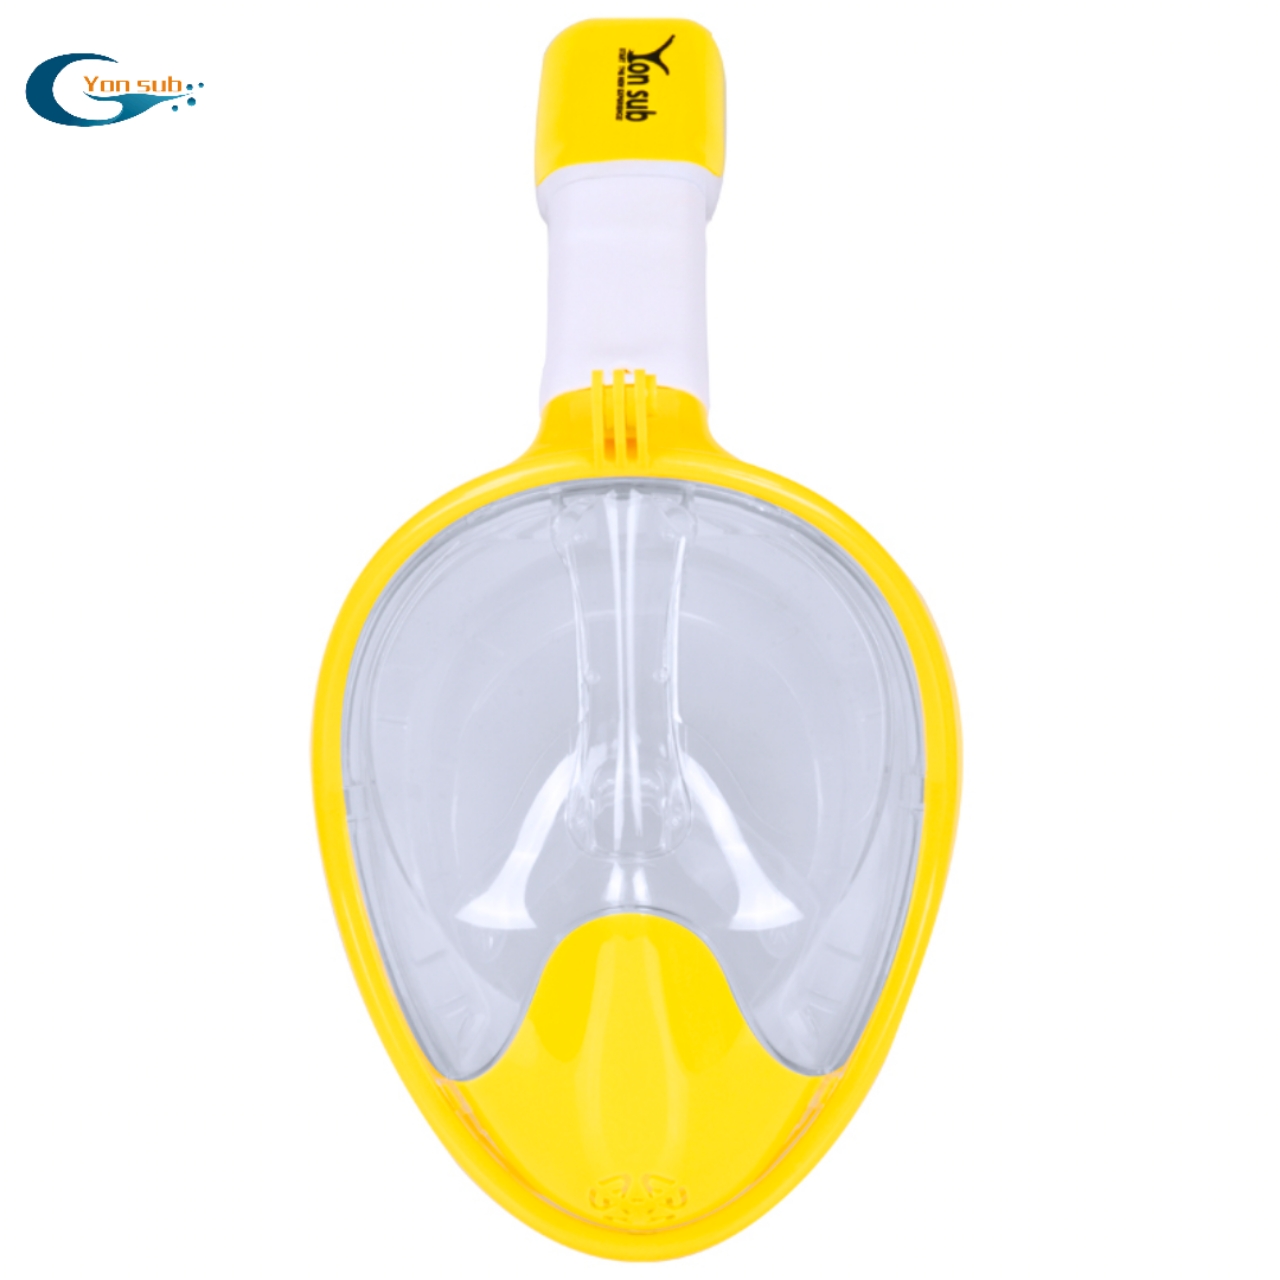 Easy adjustable can breath snorkelling diving mask full face